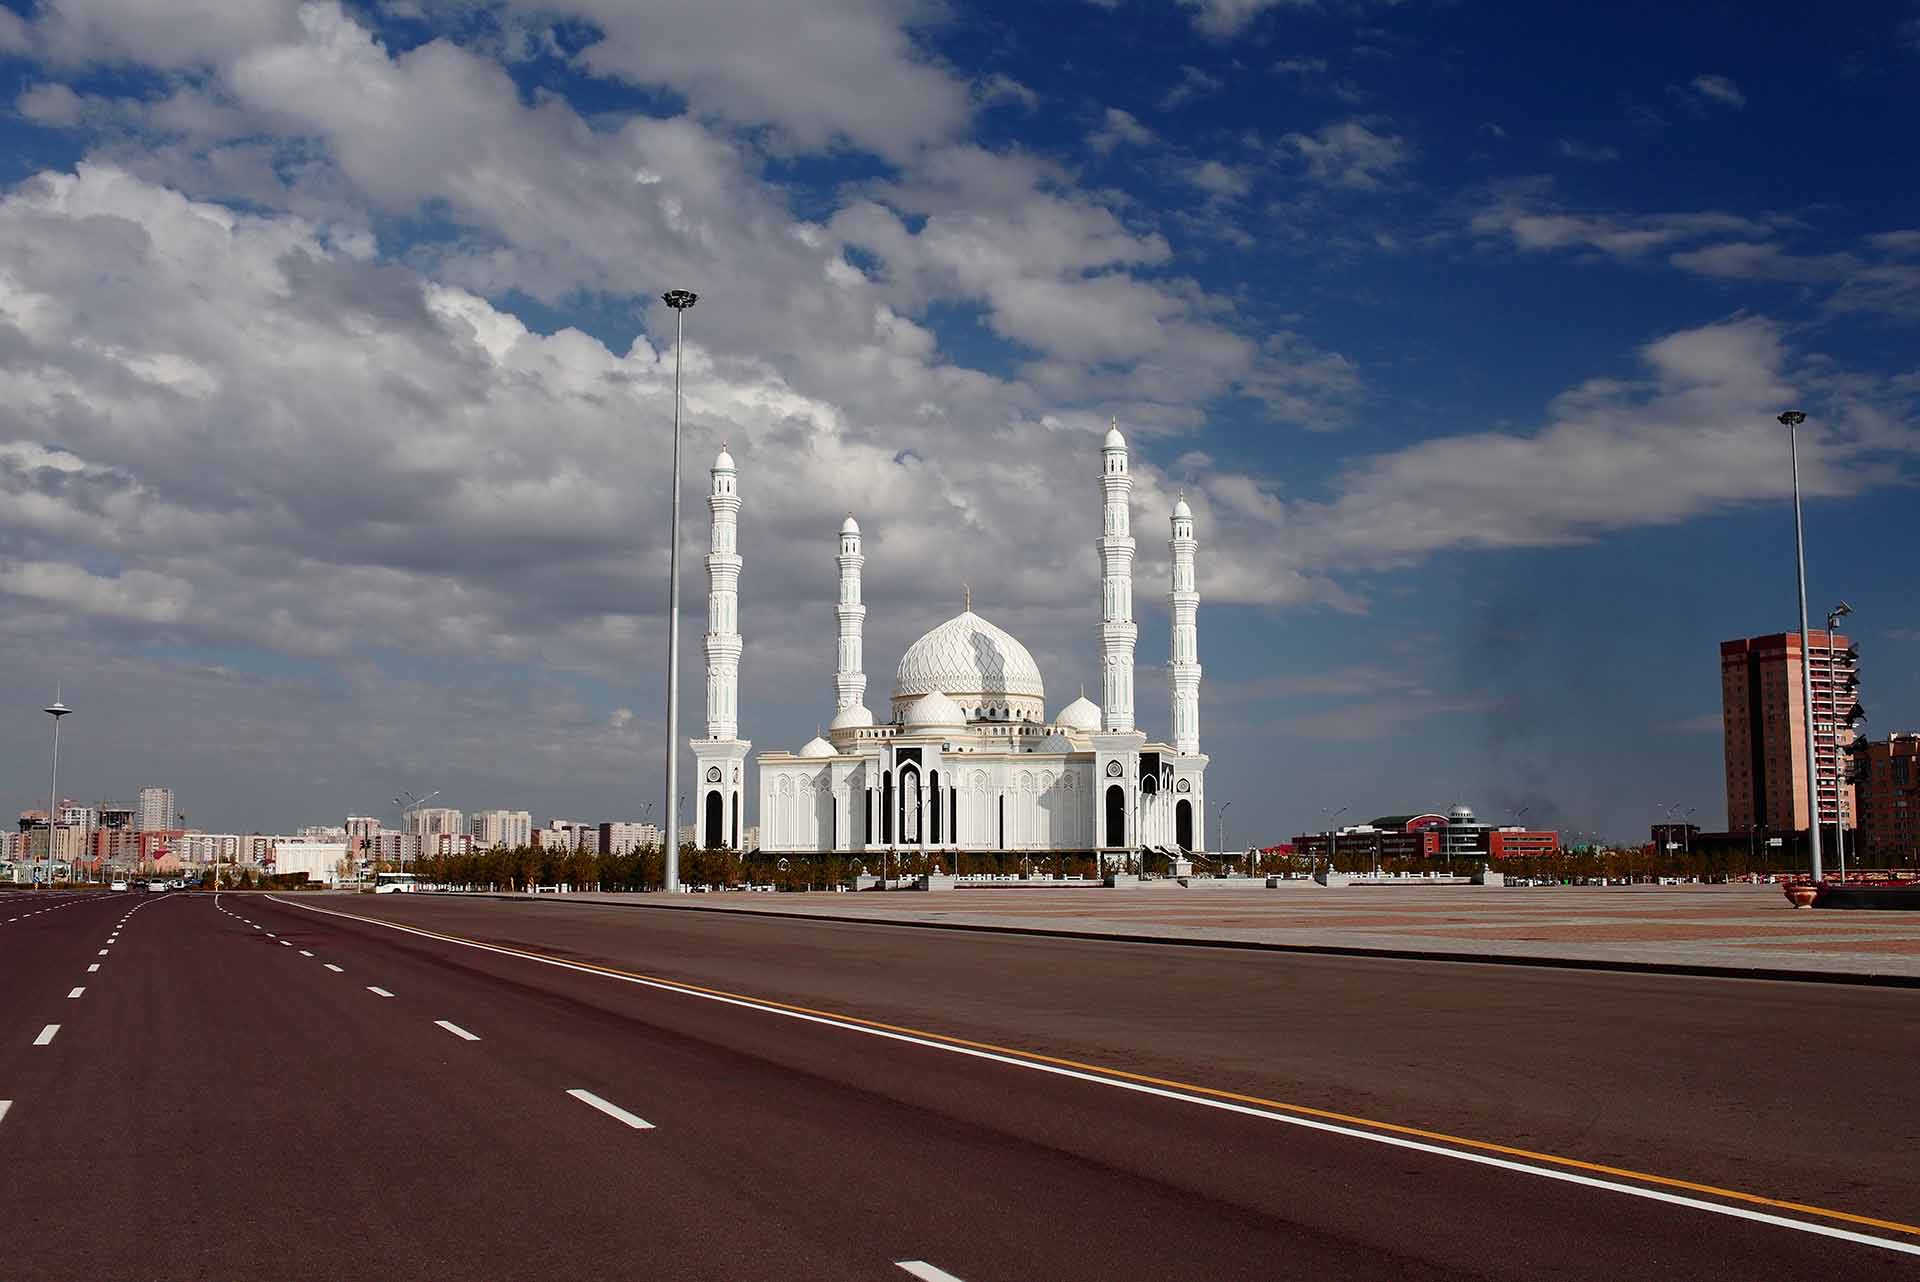 Khazret Sultan Mosque in the capital of Kazakhstan - the city of Astana